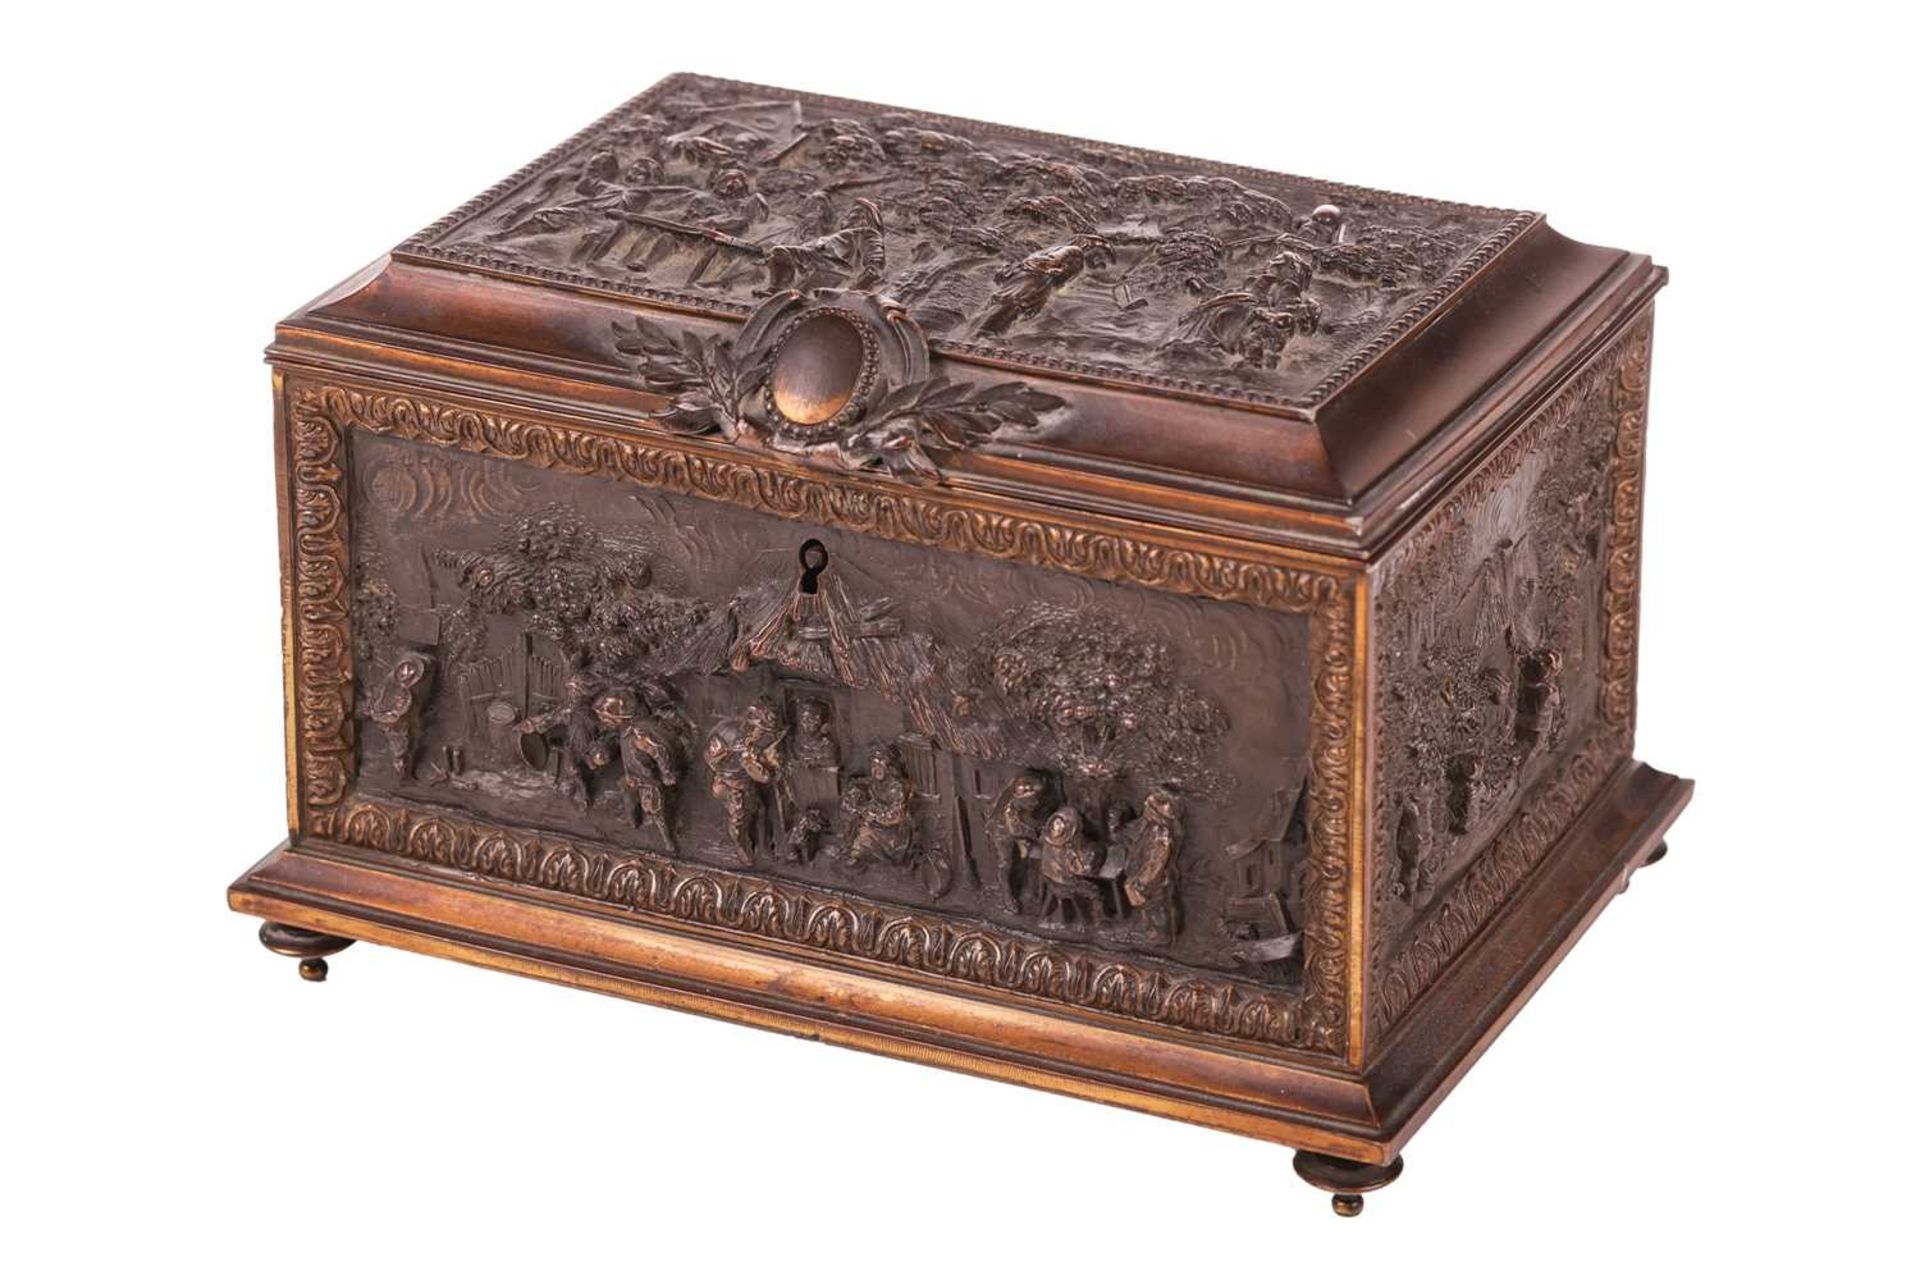 A French late 19th century gilt and oxidized bronze rectangular table casket, the caddy-top and side